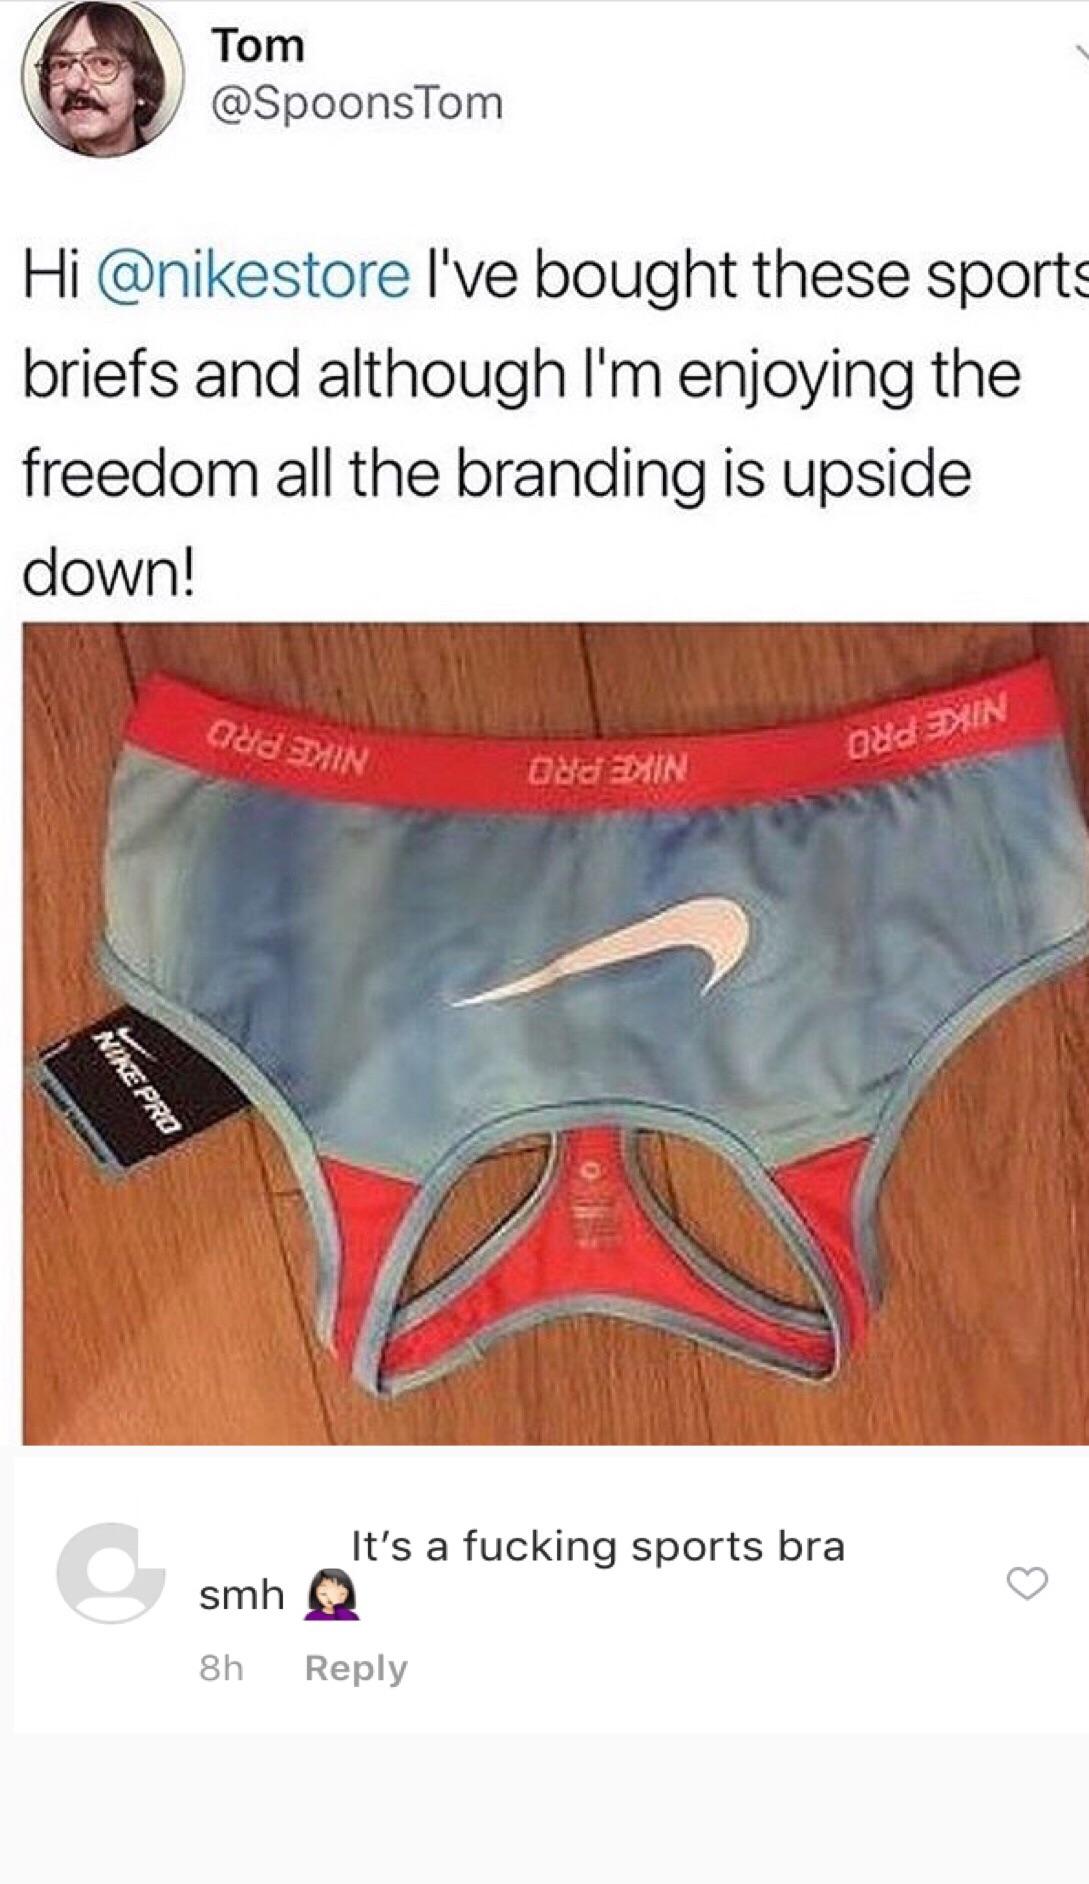 nike sports briefs meme - A Tom Hi I've bought these sports briefs and although I'm enjoying the freedom all the branding is upside down! Oud Shin Xin Ou De Edin Nire Pro It's a fucking sports bra smh 8h